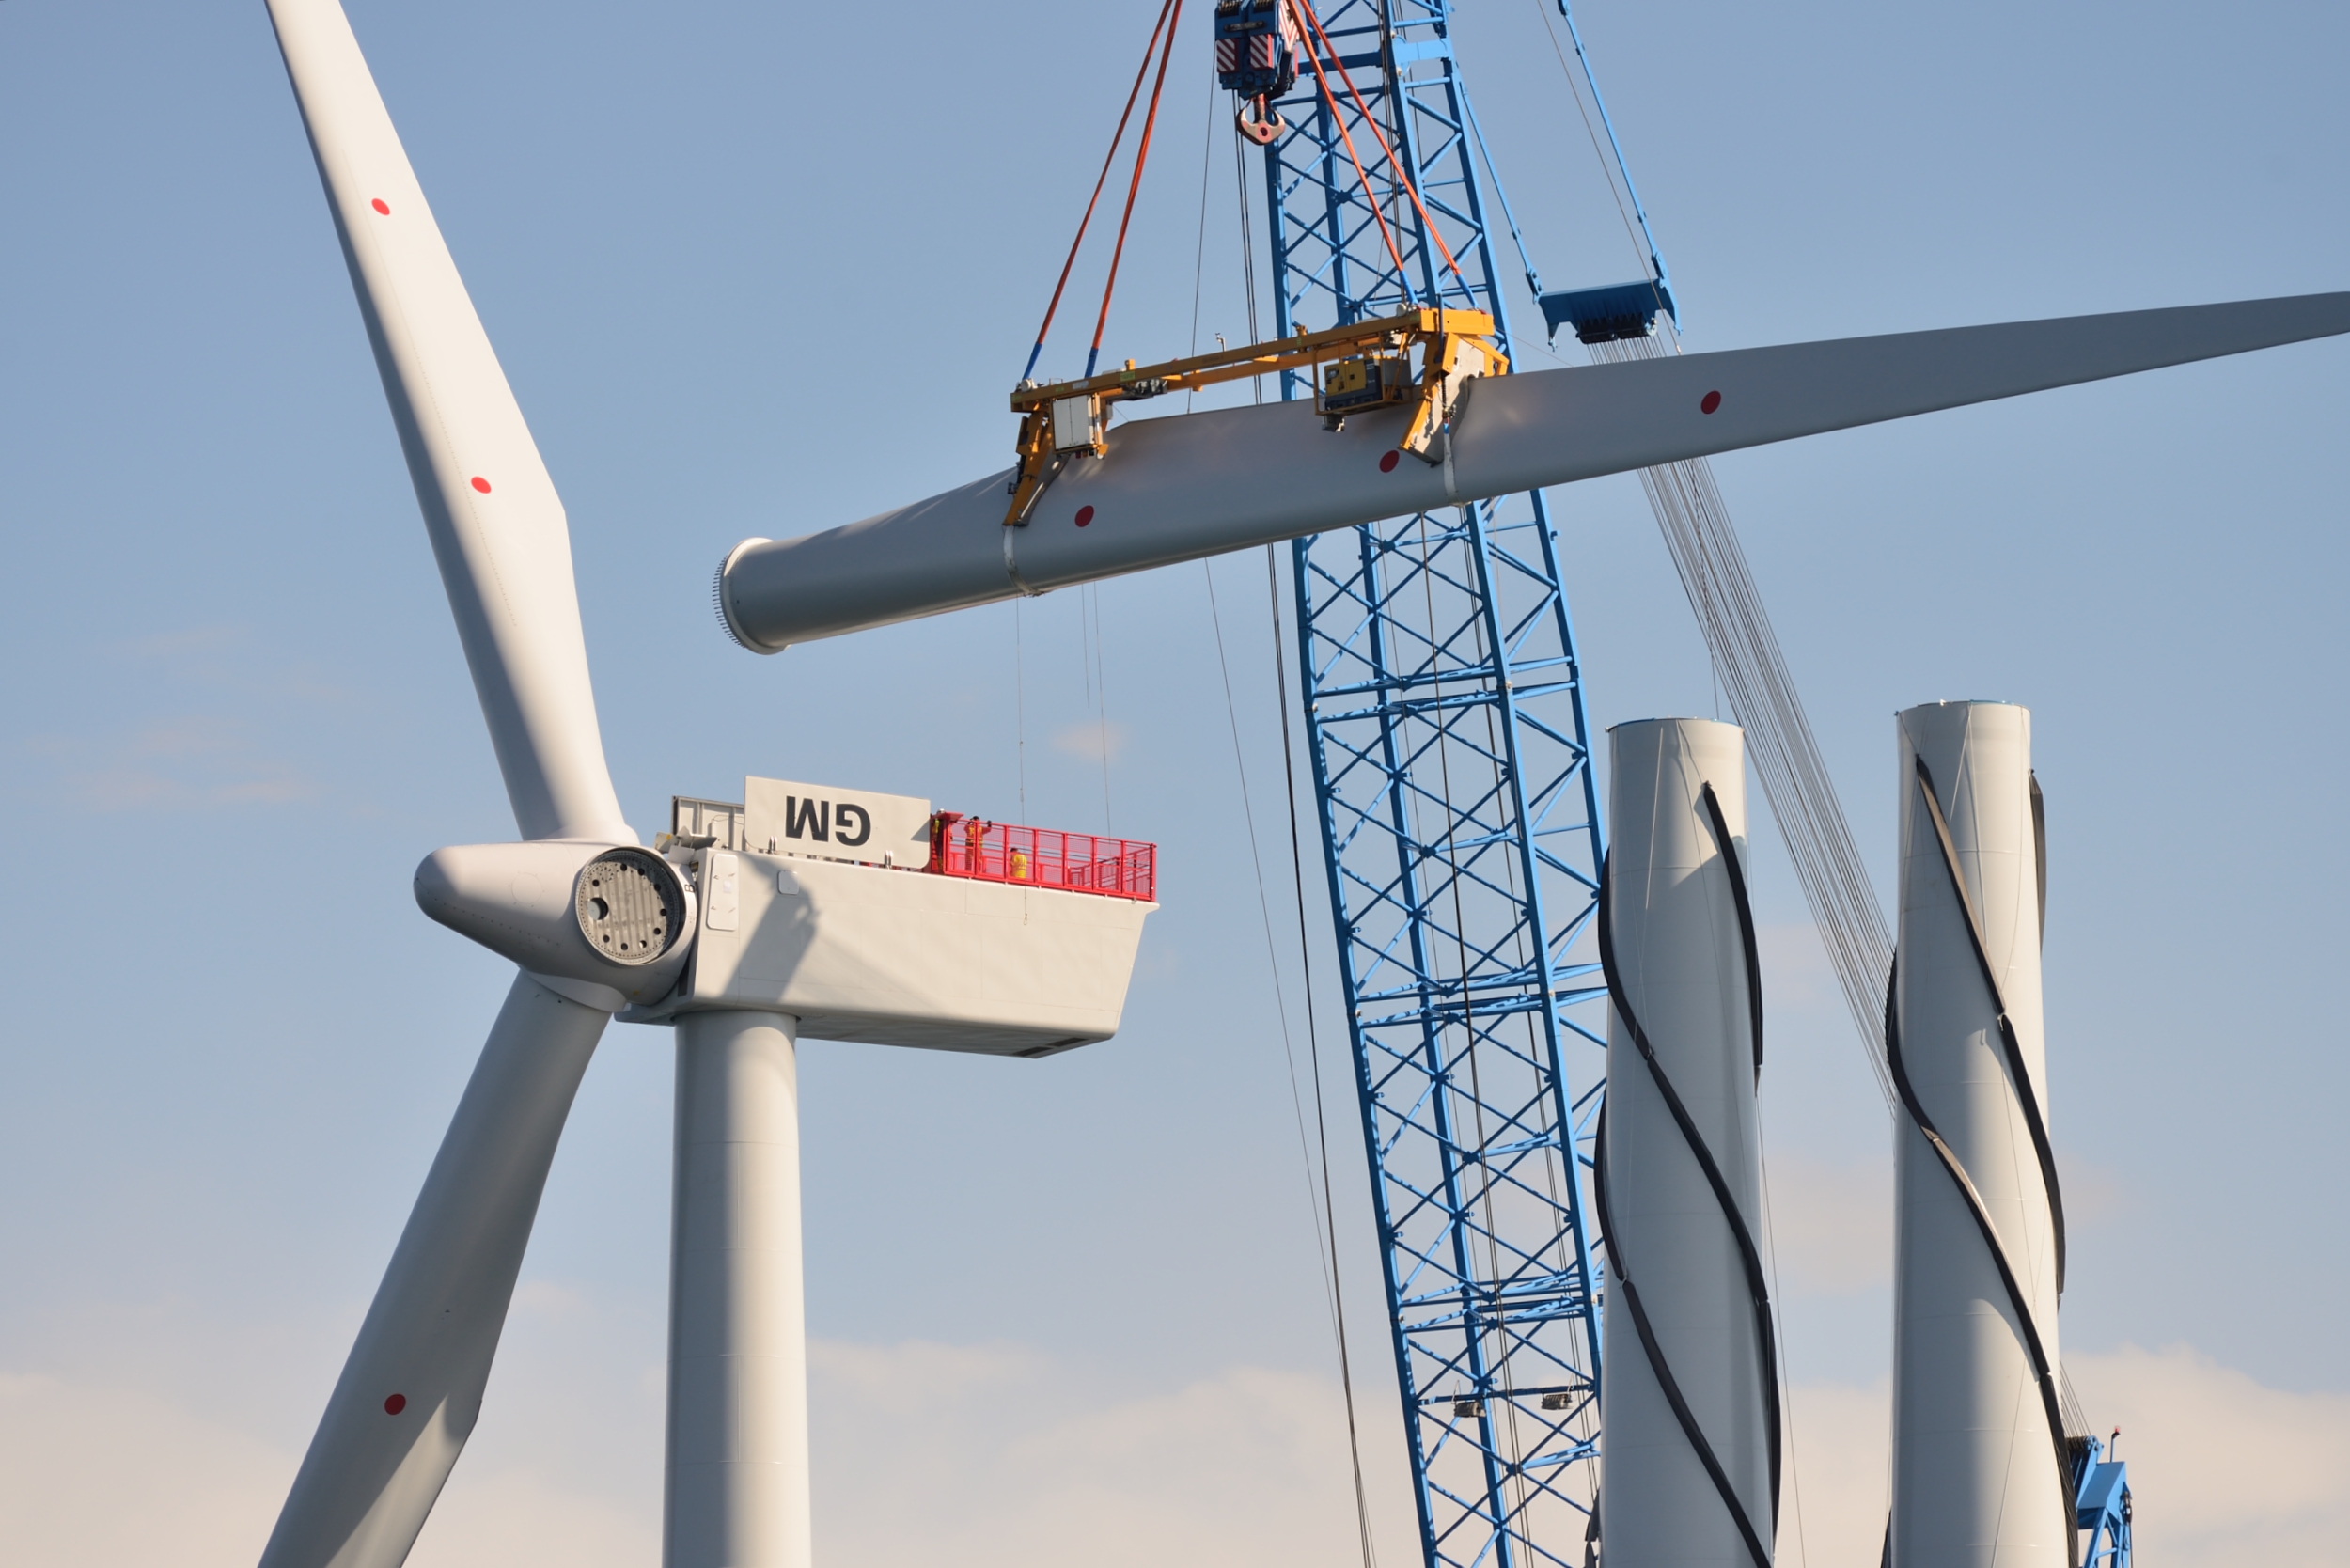 Wind turbine being installed at the Gwynt y Mor offshore wind farm